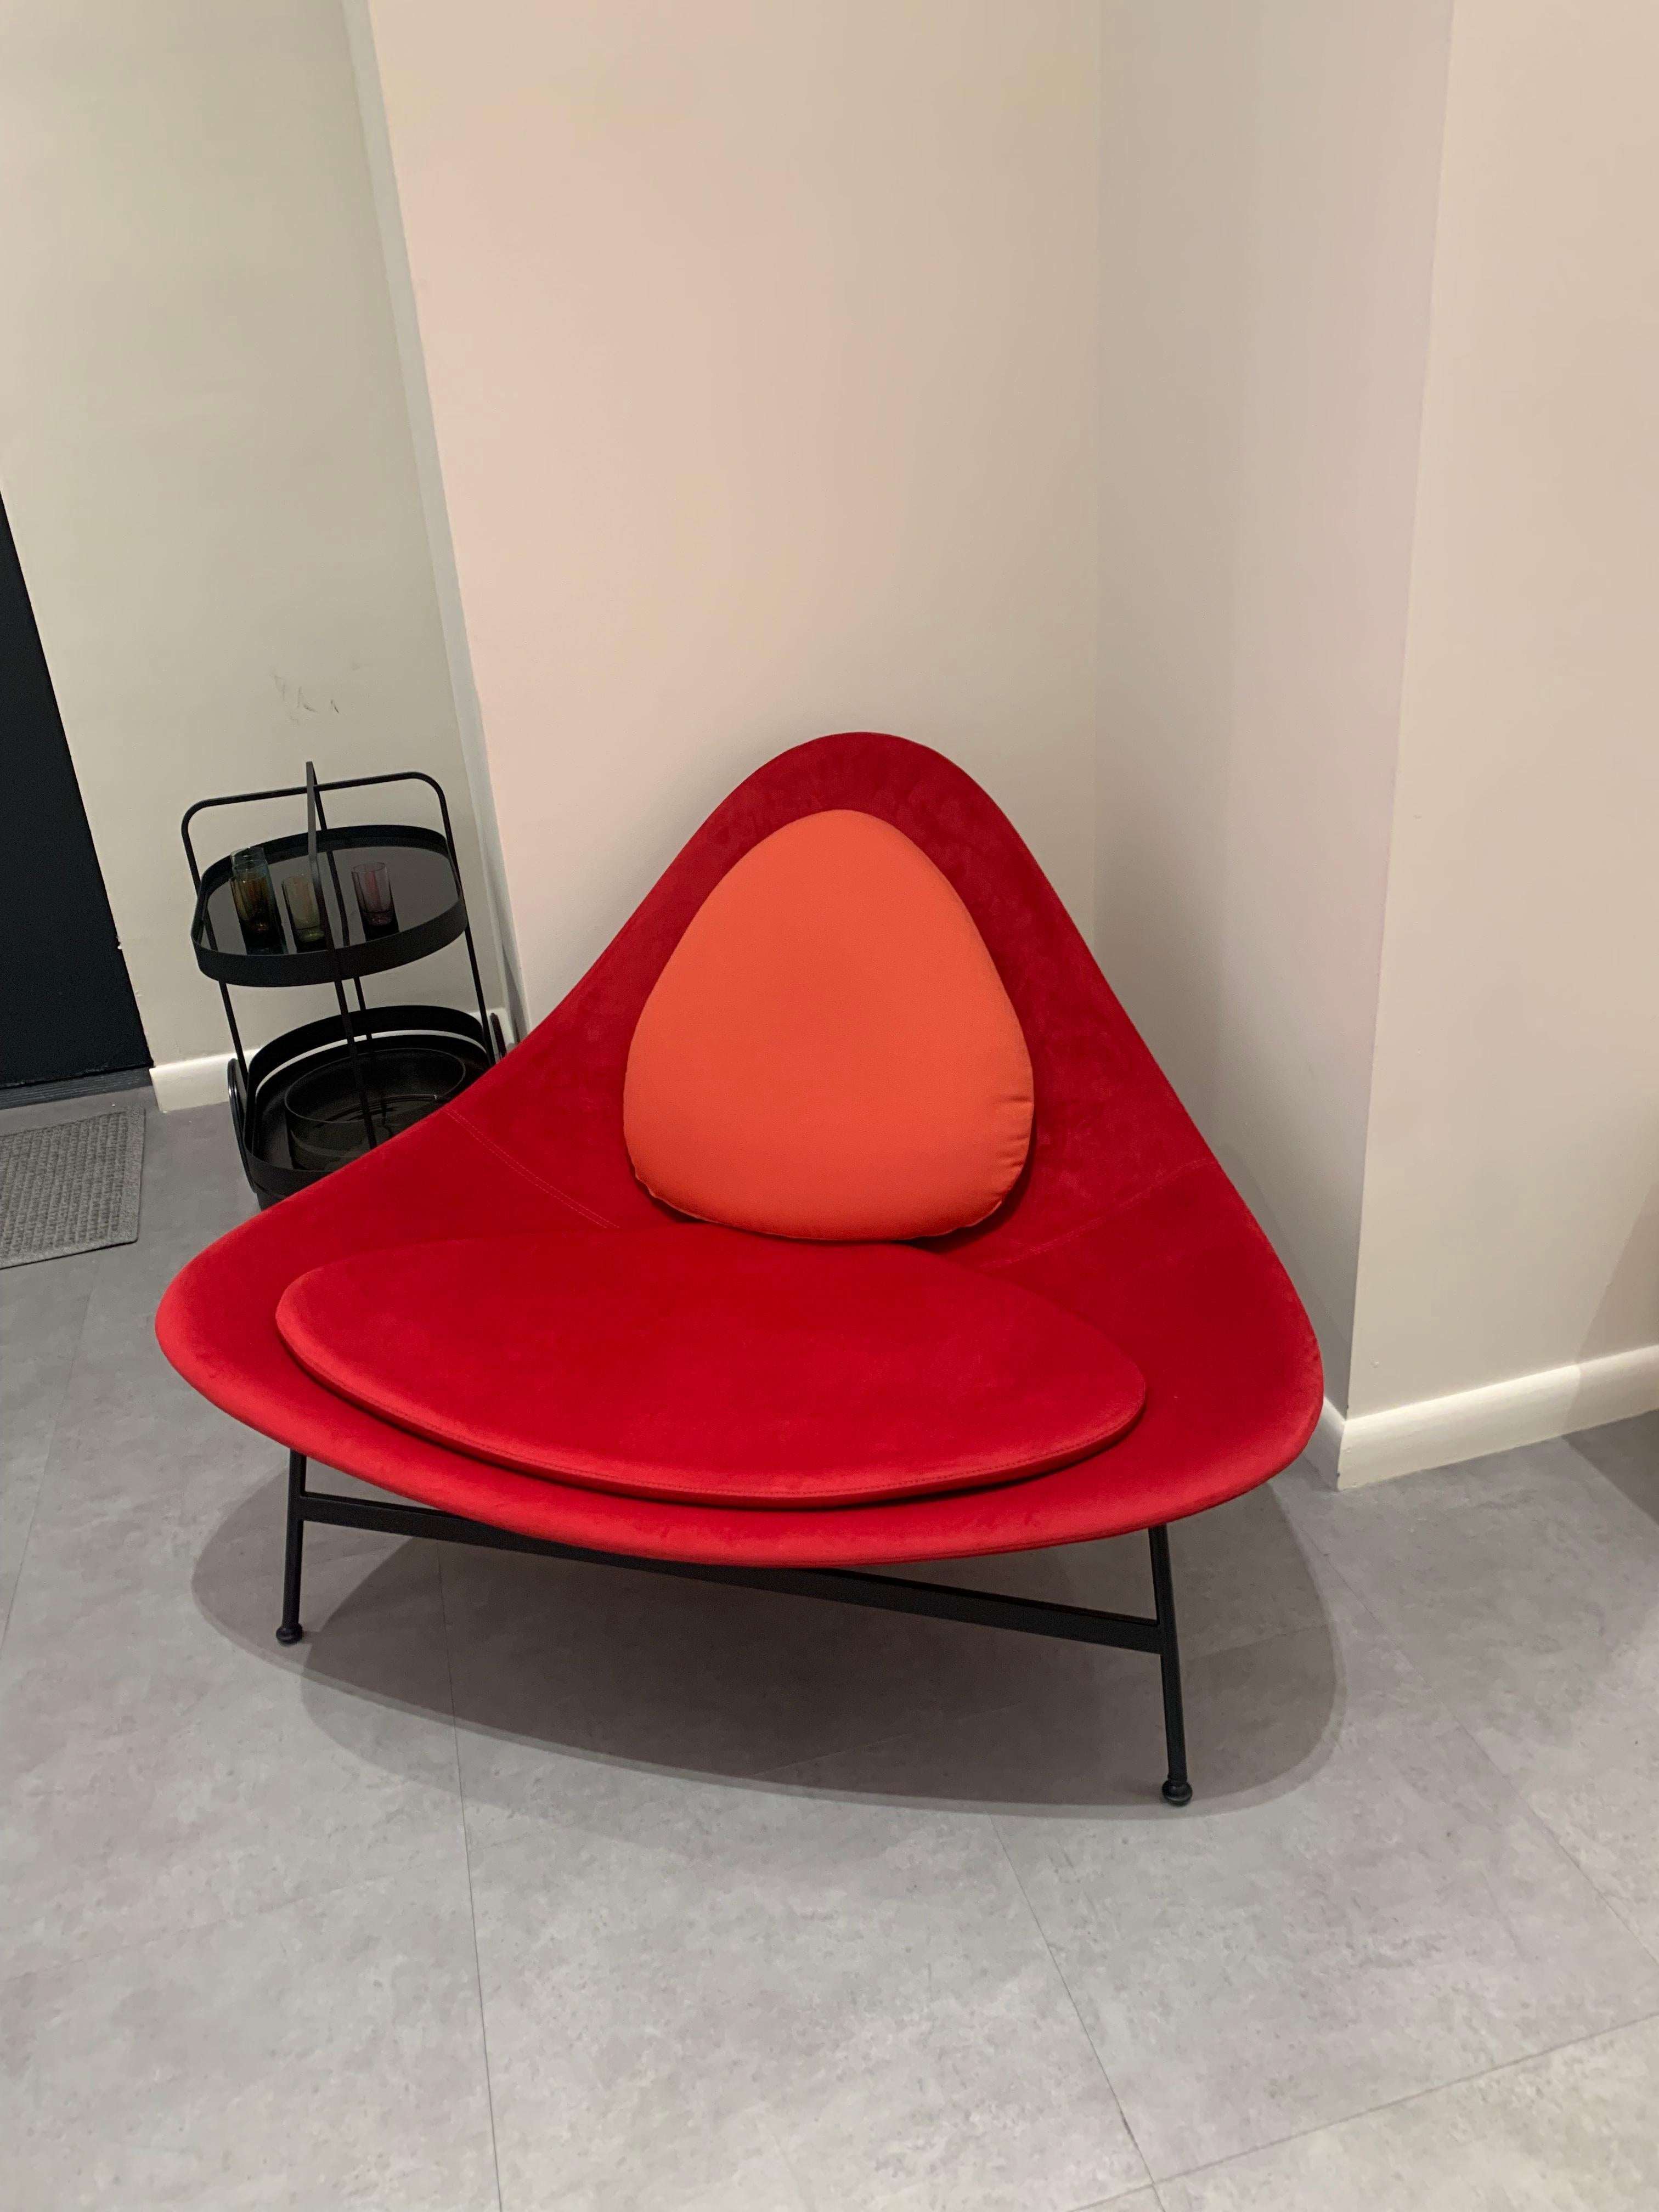 Baleri Bermuda Chair
DIVA 258 FABRIC - red
Width: 123 cm
Depth: 95cm
Height: 86.5cm
Seat height: 35cm
Materiali:
Structure: Steel or solid wood
Shell: CFC-free cold-foamed rigid and flexible polyurethane.
Upholstery: Fabric
A low-slung,